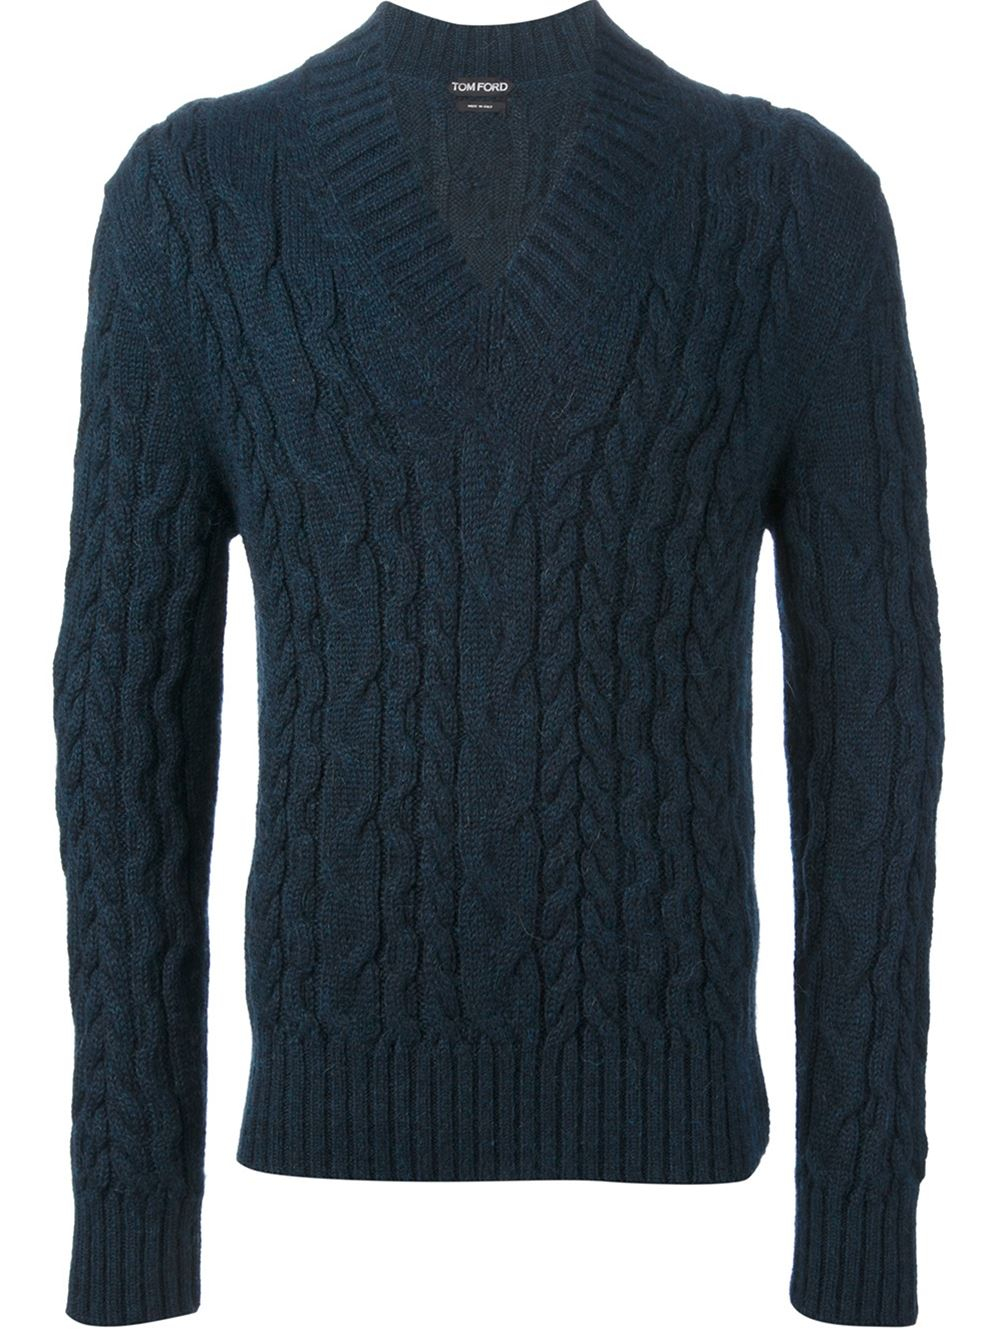 Lyst - Tom Ford Cable Knit Sweater in Blue for Men